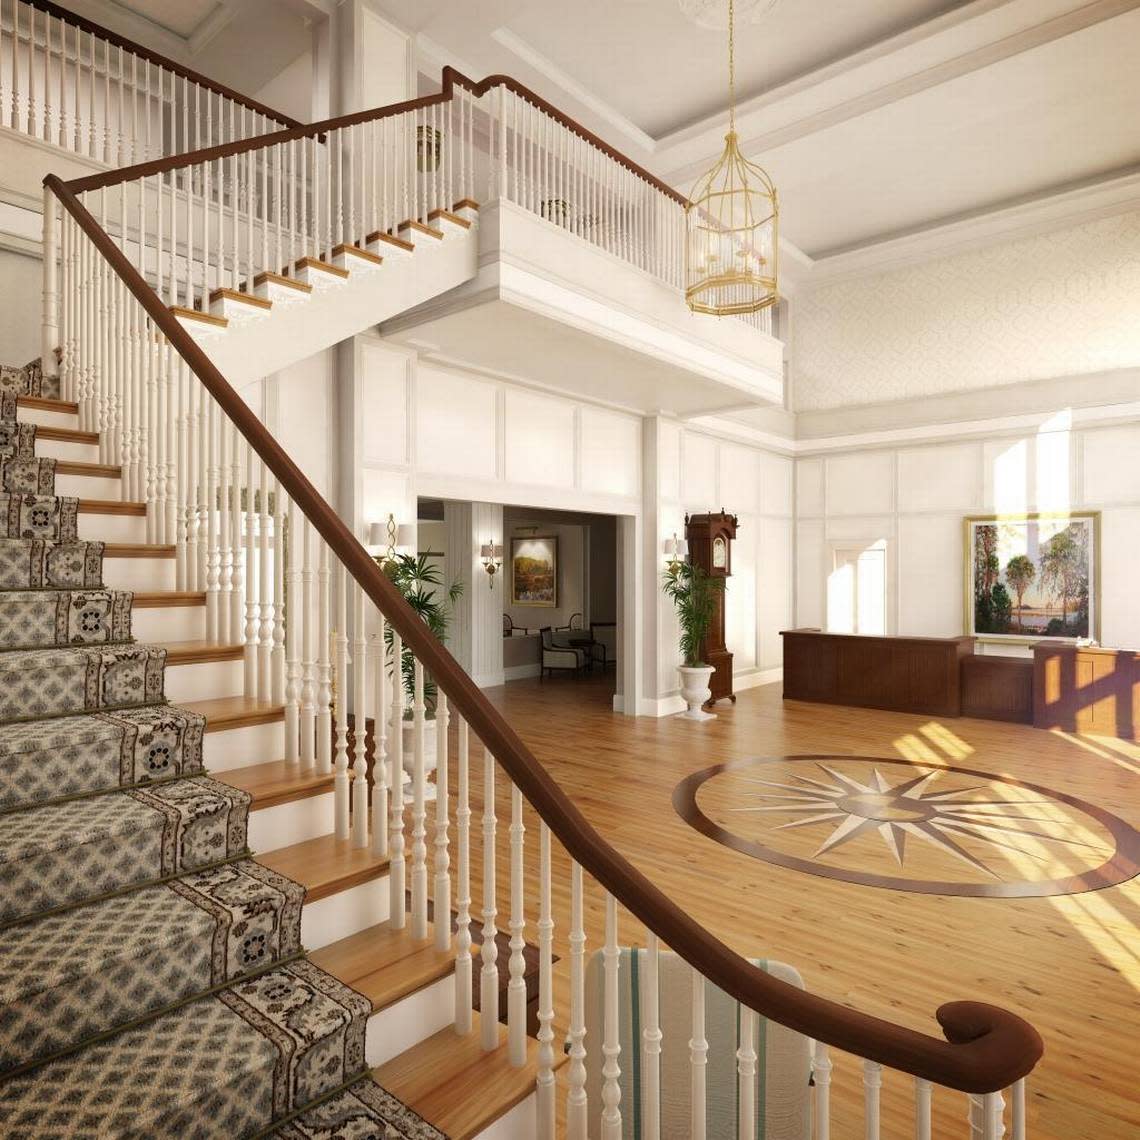 A rendering shows the lobby of Montage Palmetto Bluff, which features a sweeping staircase, reclaimed pine flooring and an antique grandfather clock.